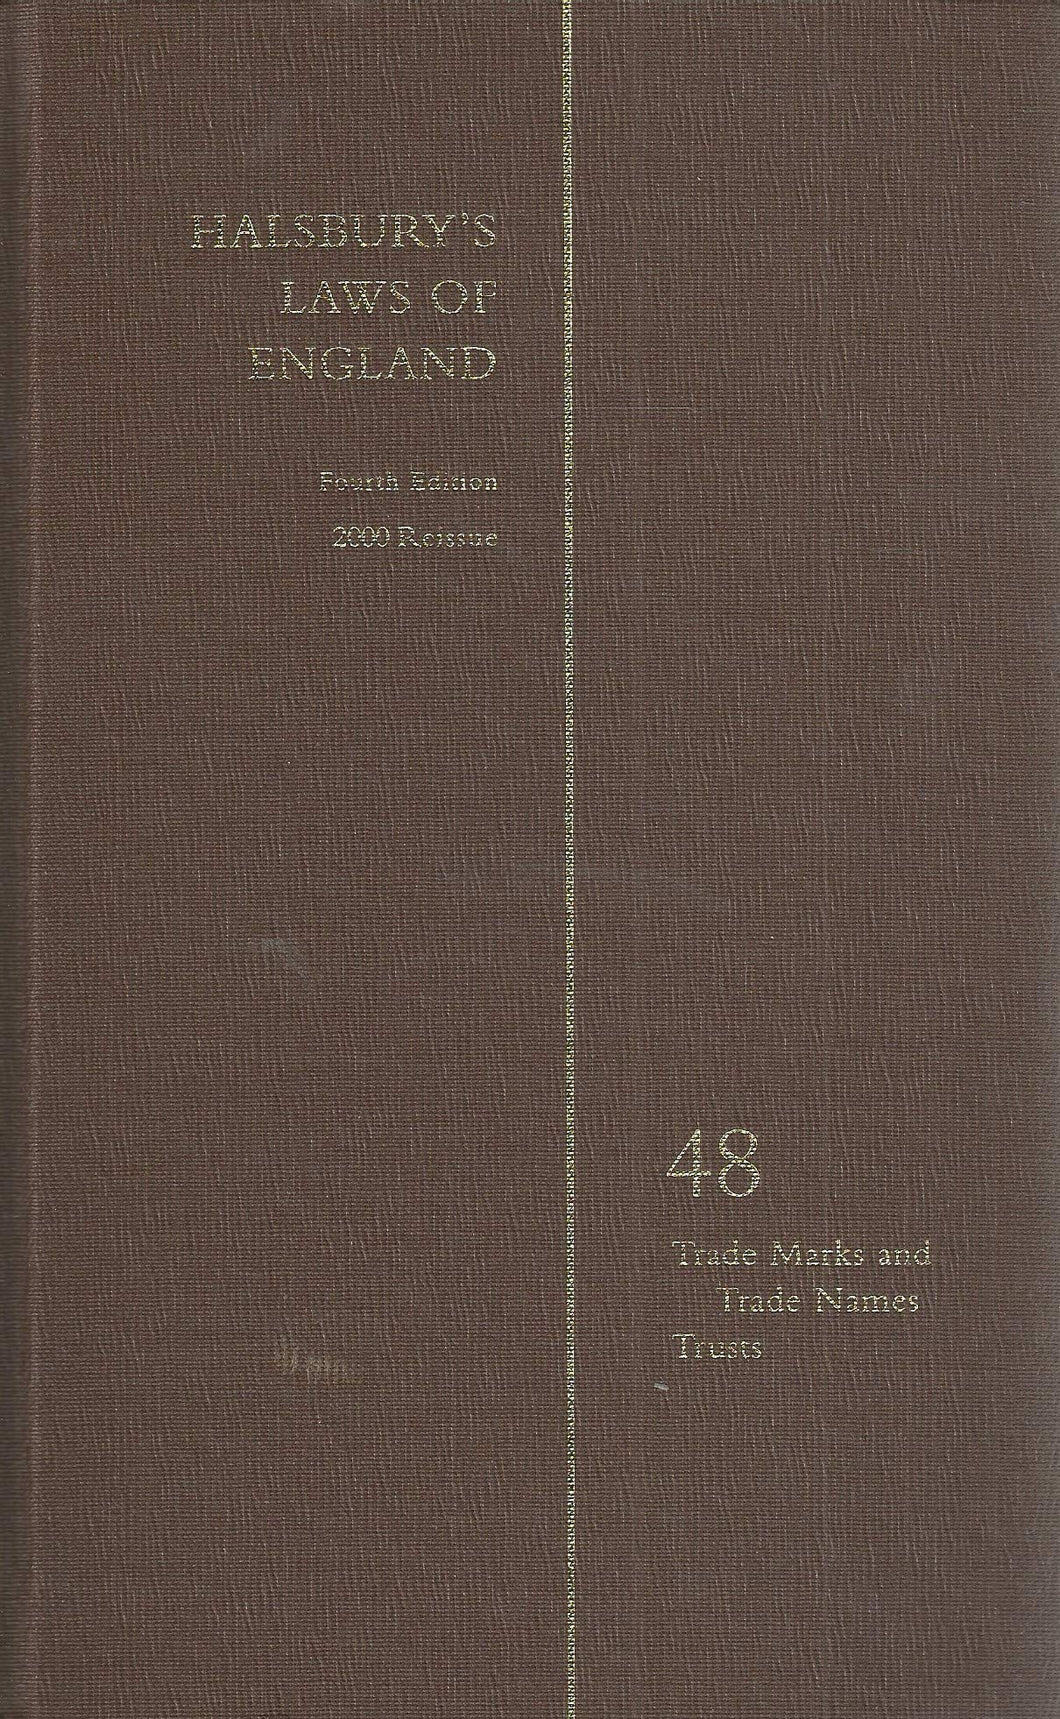 Halsbury's Laws of England - Fourth Edition, 2000 Reissue - 48: Trade Marks and Trade Names, Trusts